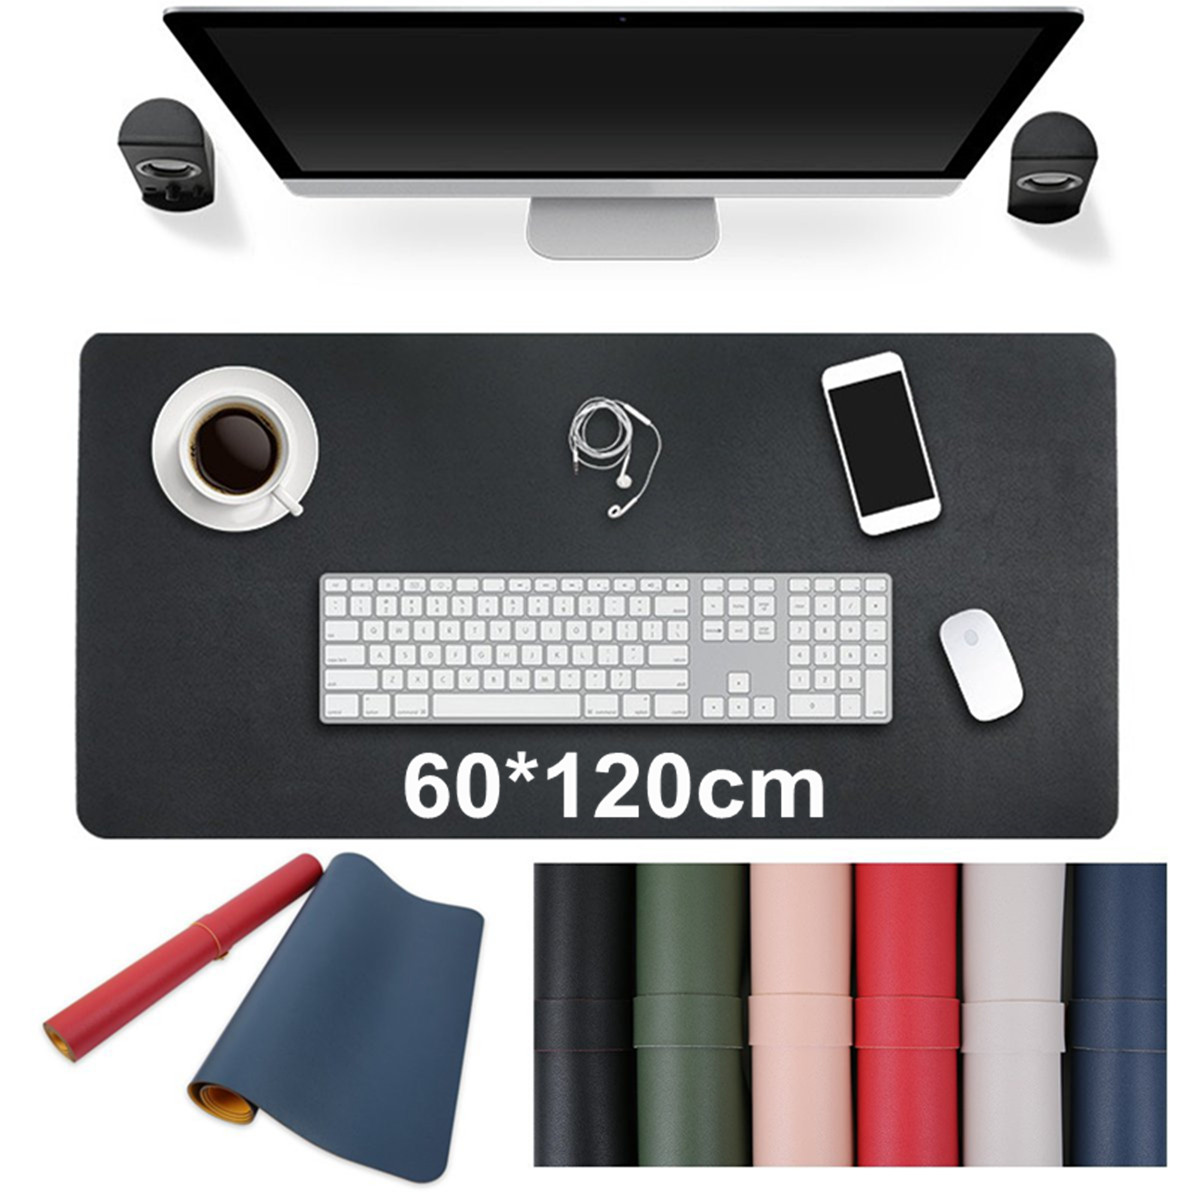 120x60cm Both Sides Two Colors PU leather Mouse Pad Mat Large Office Gaming Desk Mat 66